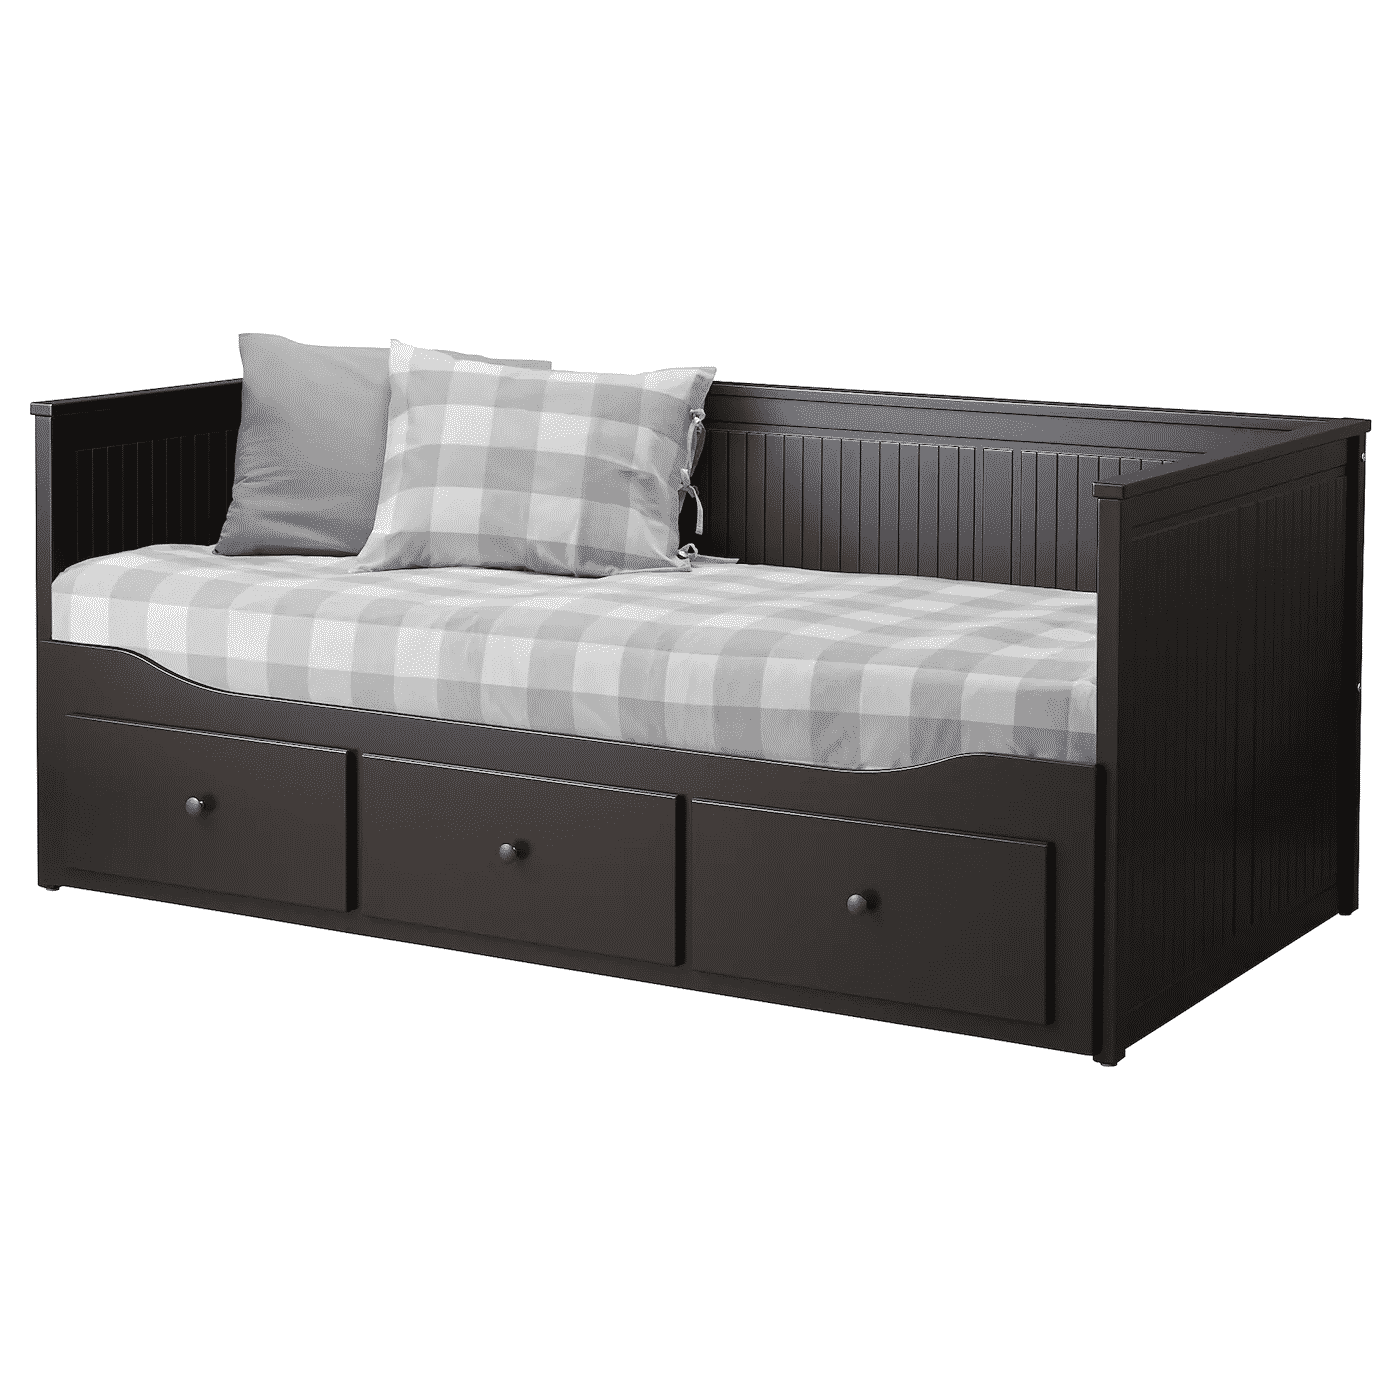 Best Ikea Twin Bed With Storage Review, Twin Trundle Bed With Storage Ikea